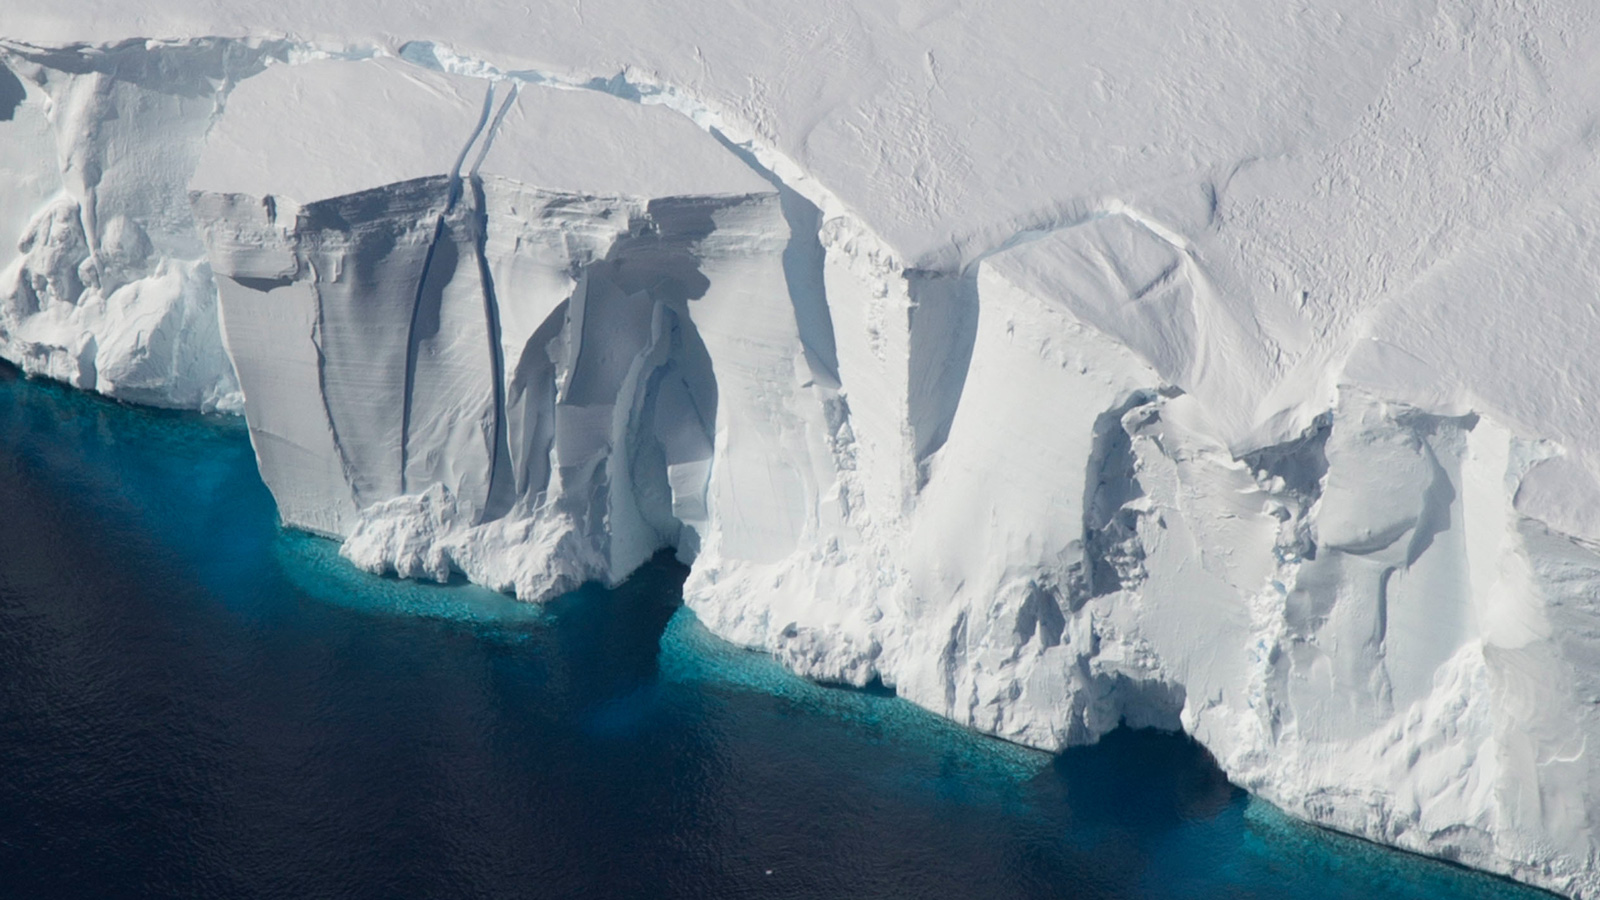 Melting ice sheets will add over 15 inches to global sea level upward thrust by 2100